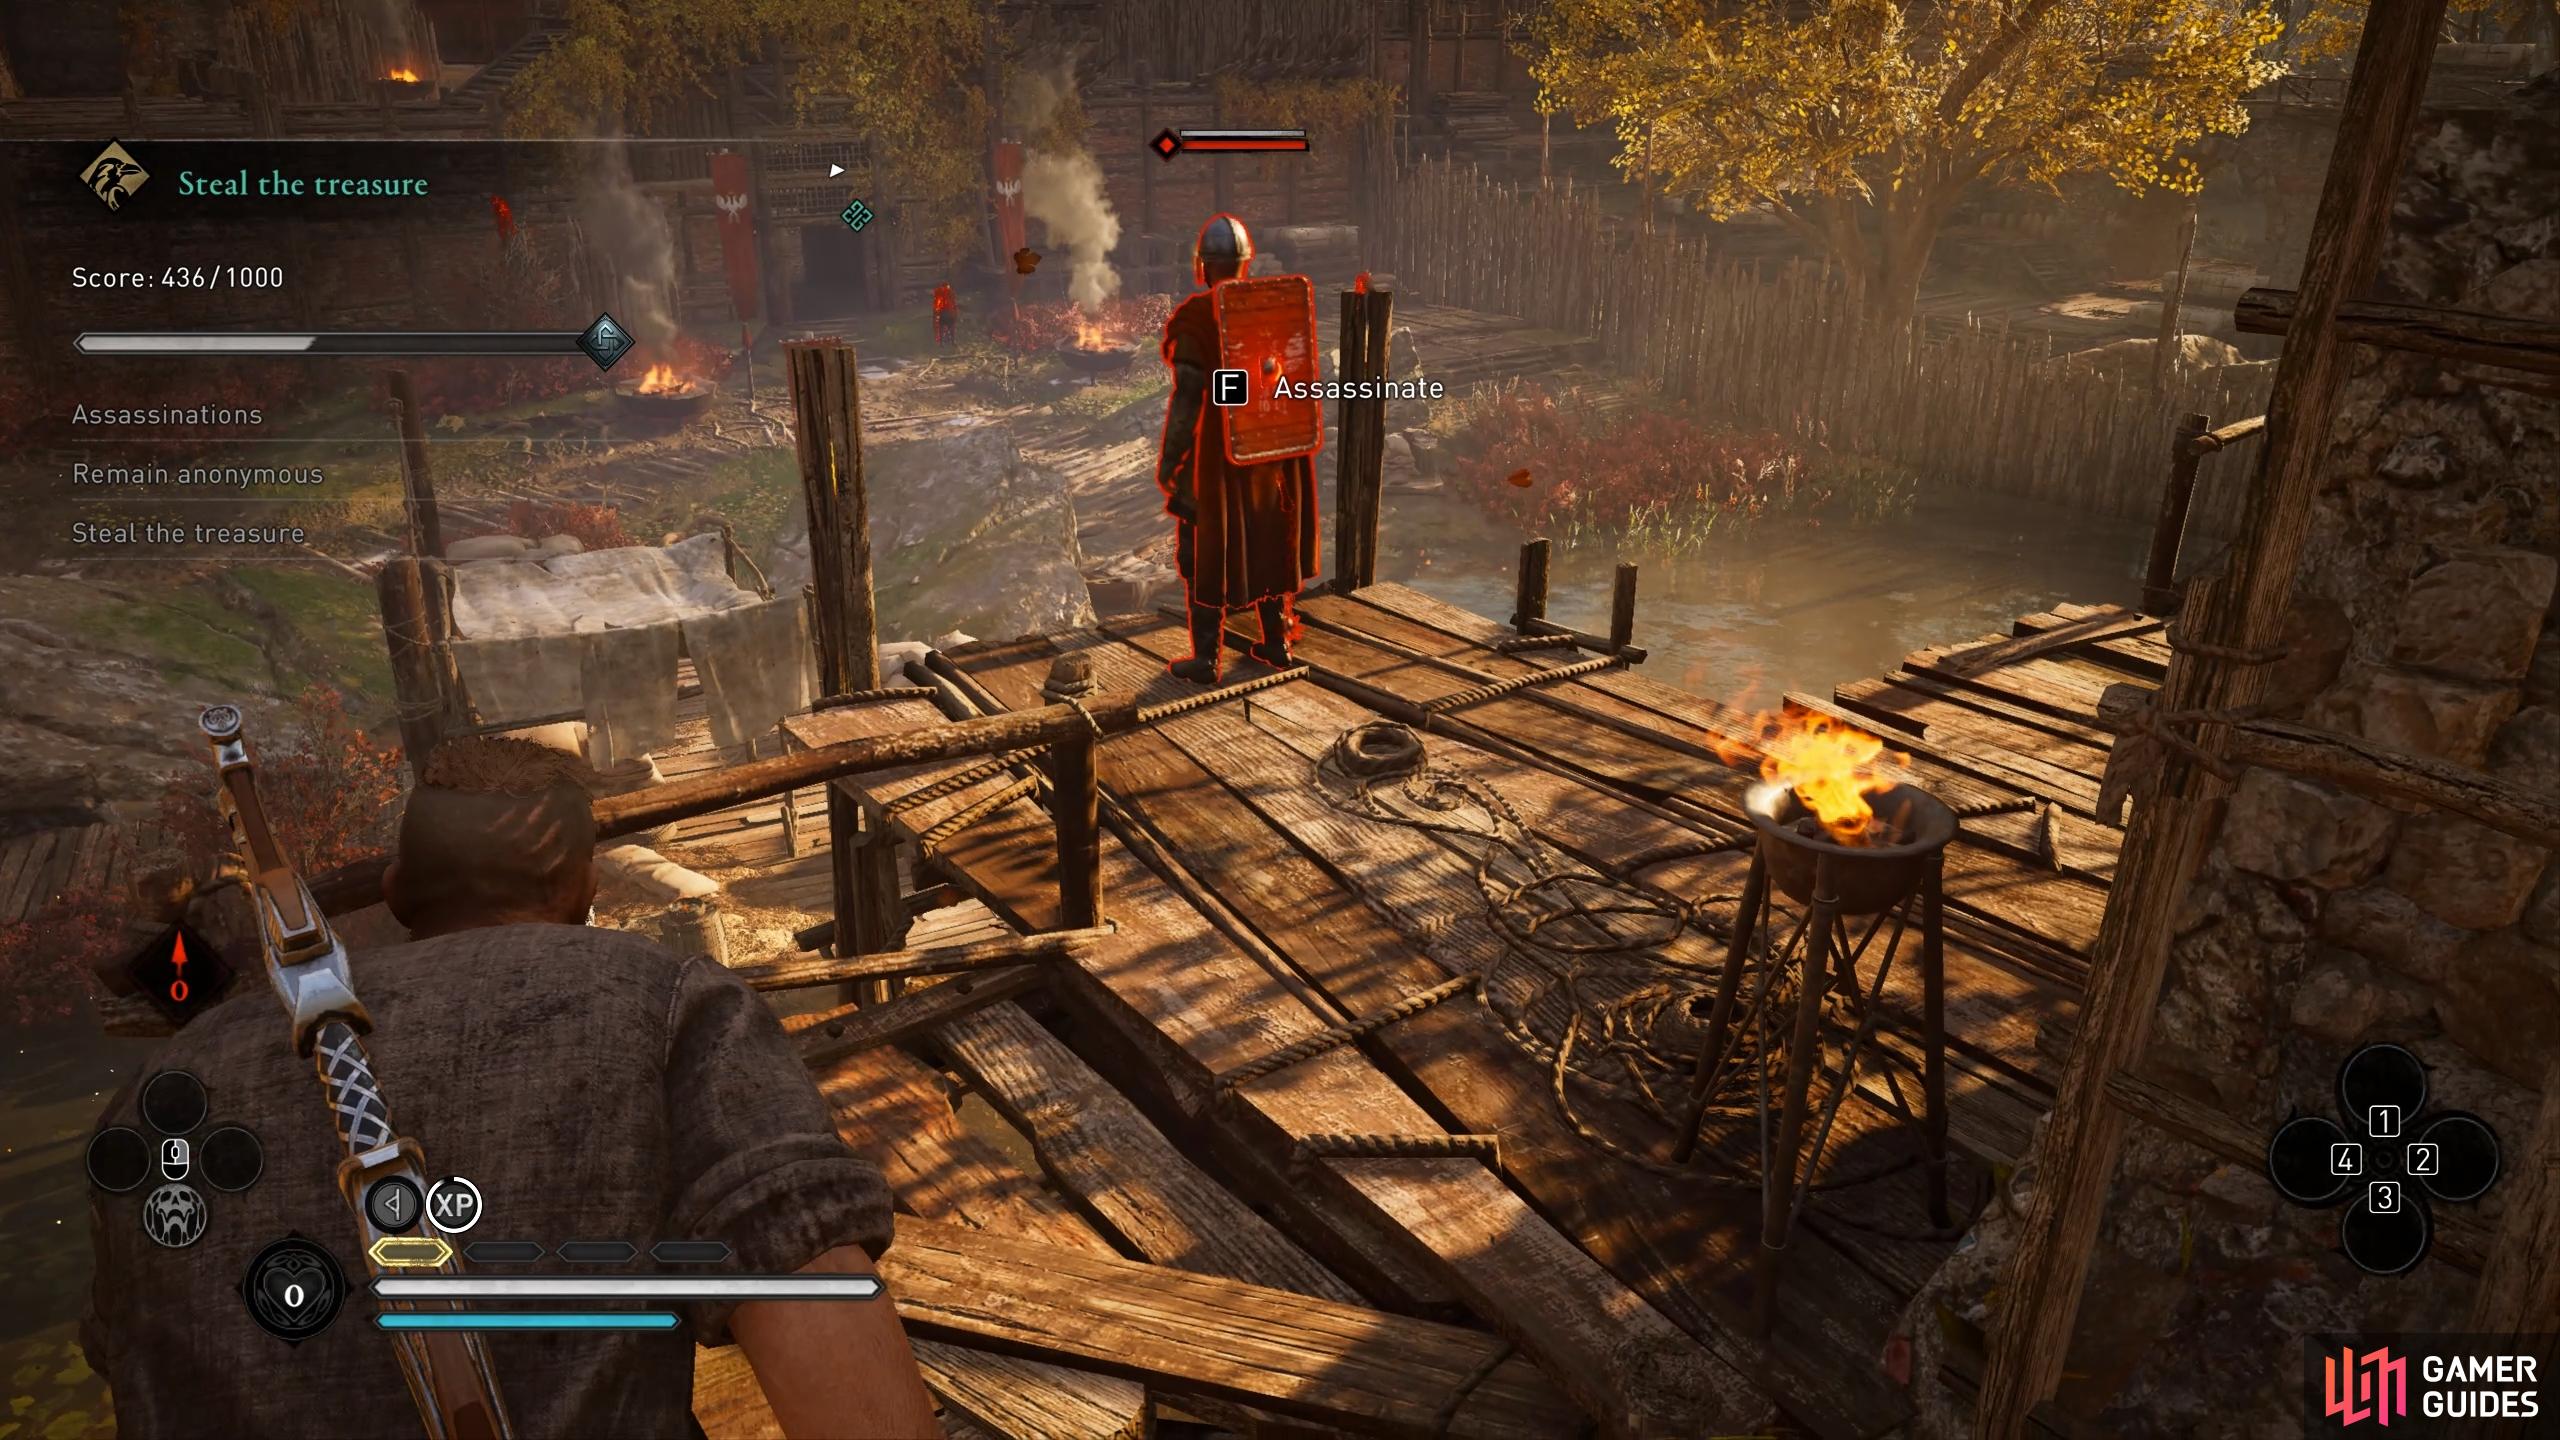 Wait for the guard on the tower platform to approach the ladder before you jump up to assassinate them.